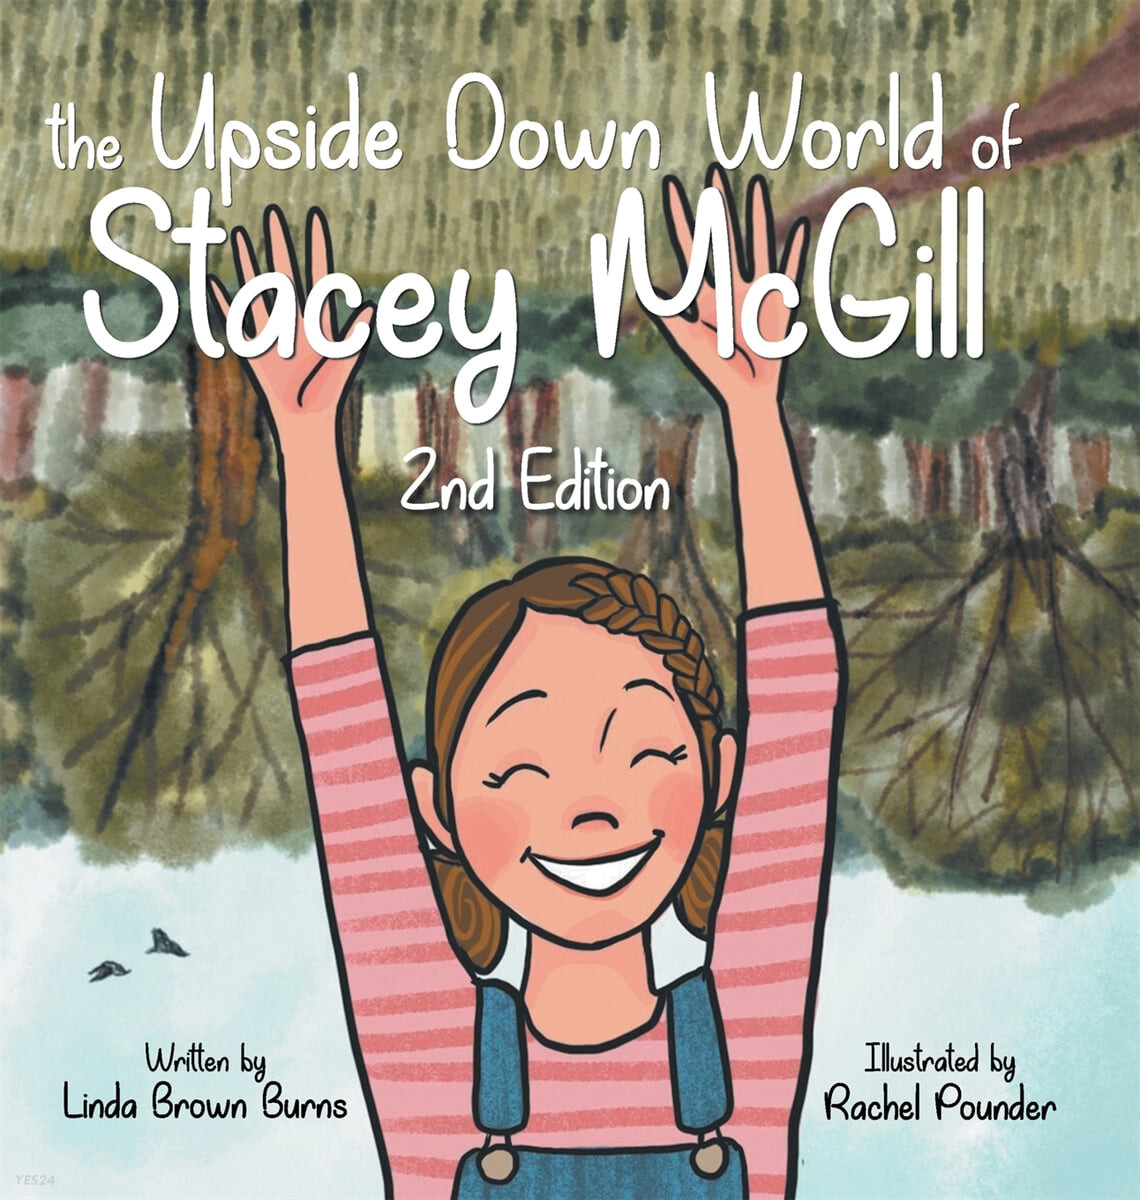 (The) Upside down world of stacey McGill 